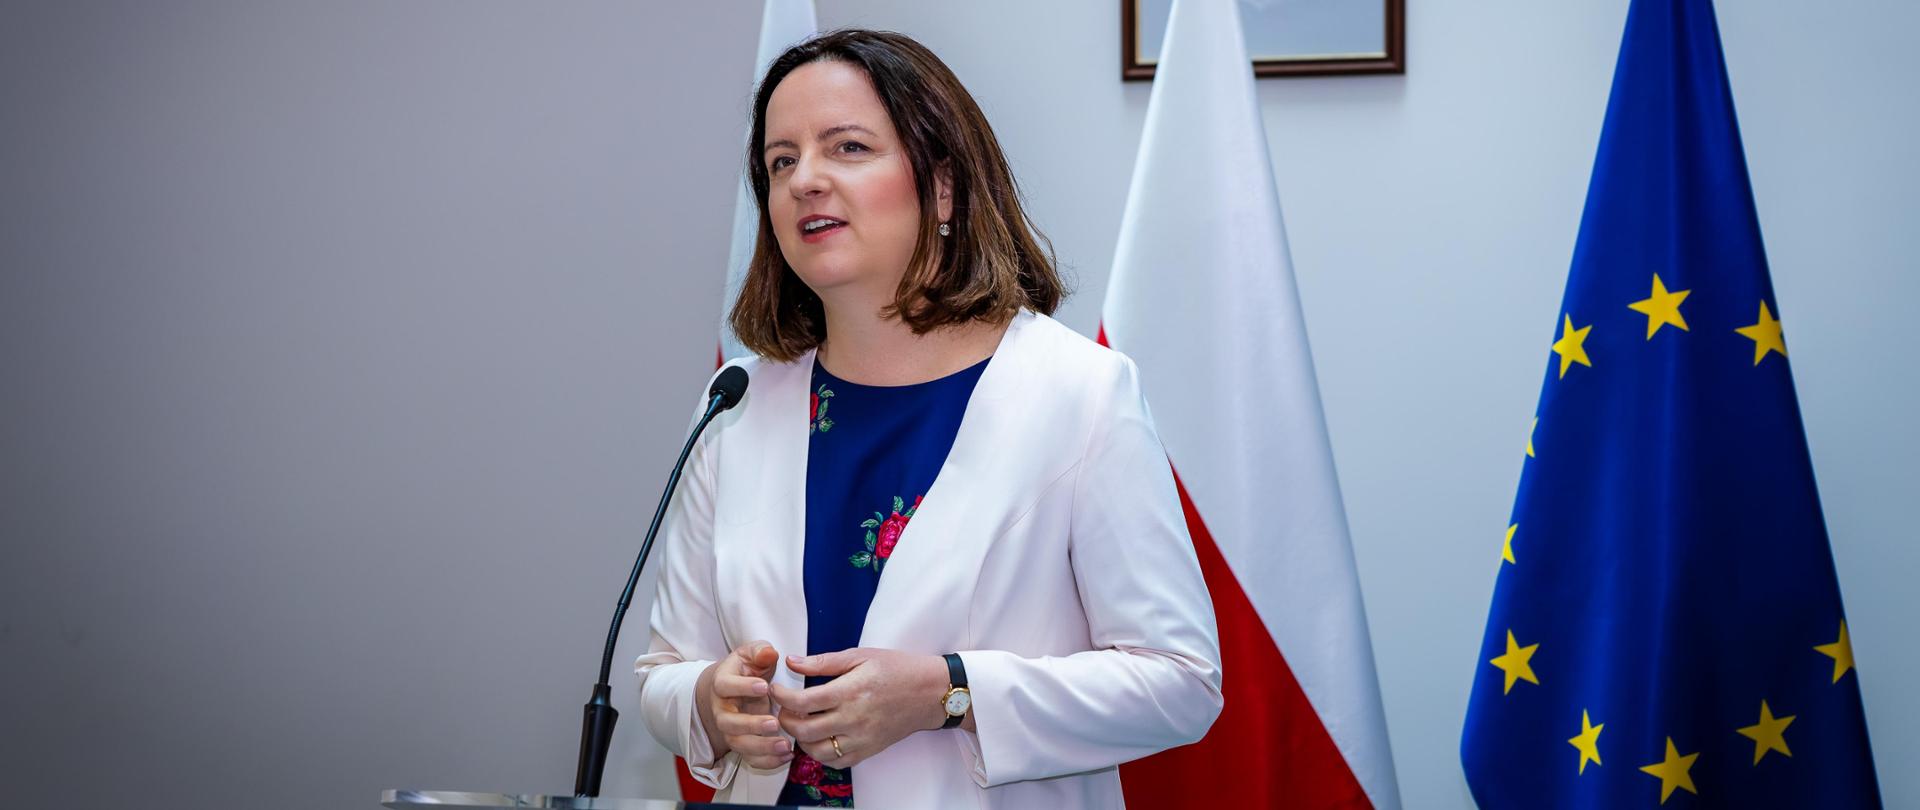 On the occasion of Poland's 20th anniversary in the European Union, on the initiative of Deputy Minister Anna Radwan-Röhrenschef, a European Breakfast was held.